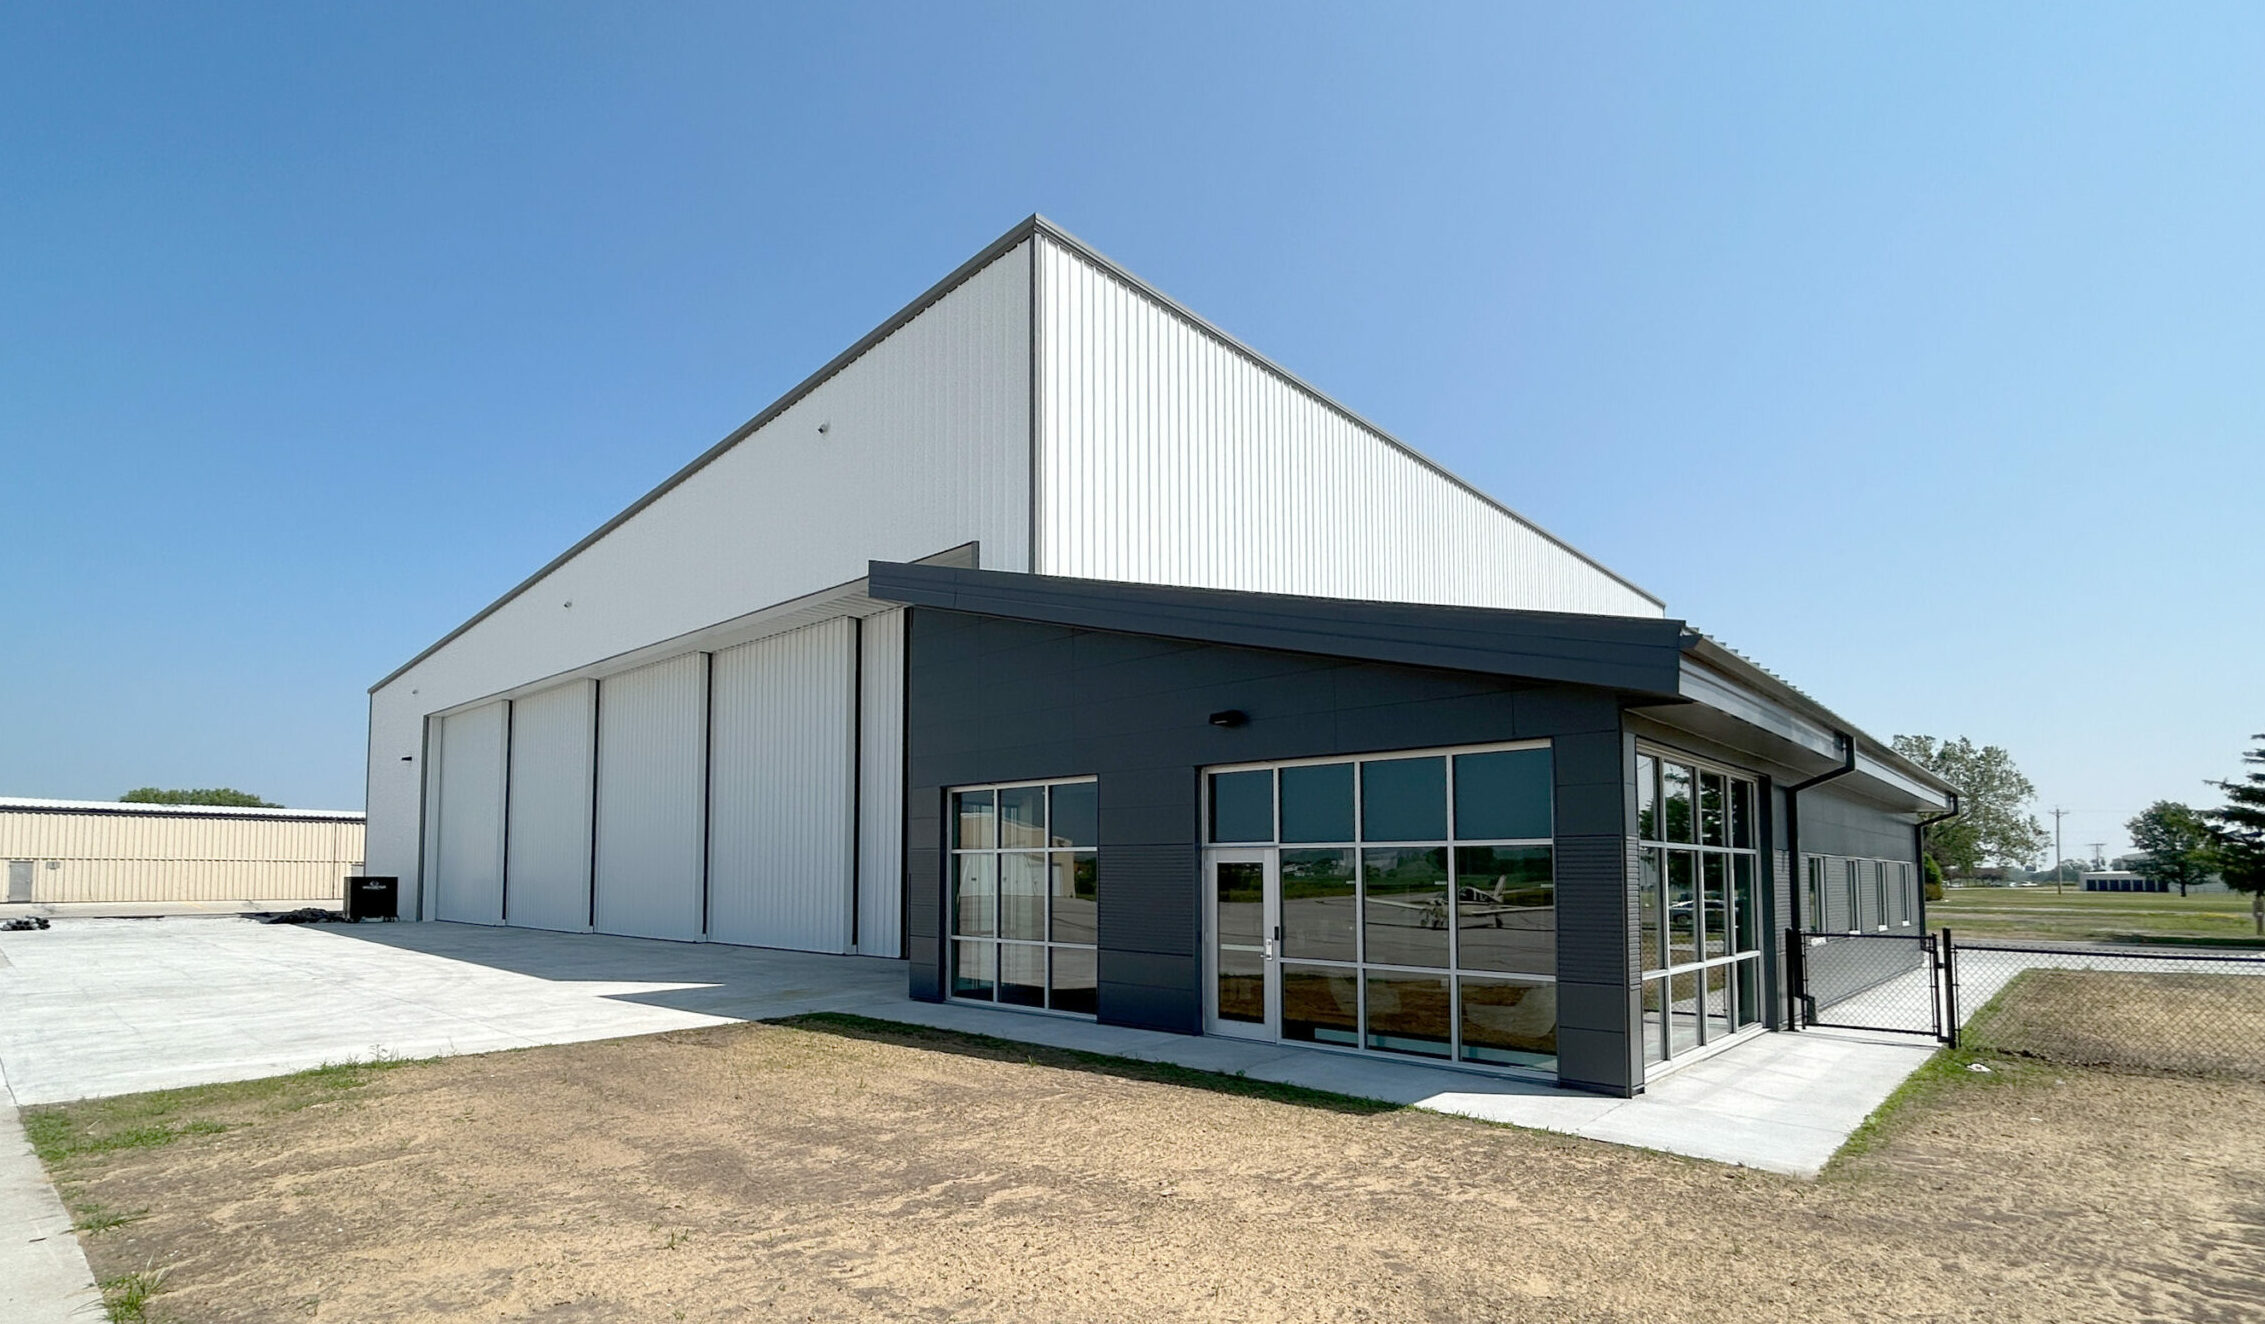 New Hangar Completed at Ames Airport for Summit Agricultural Group